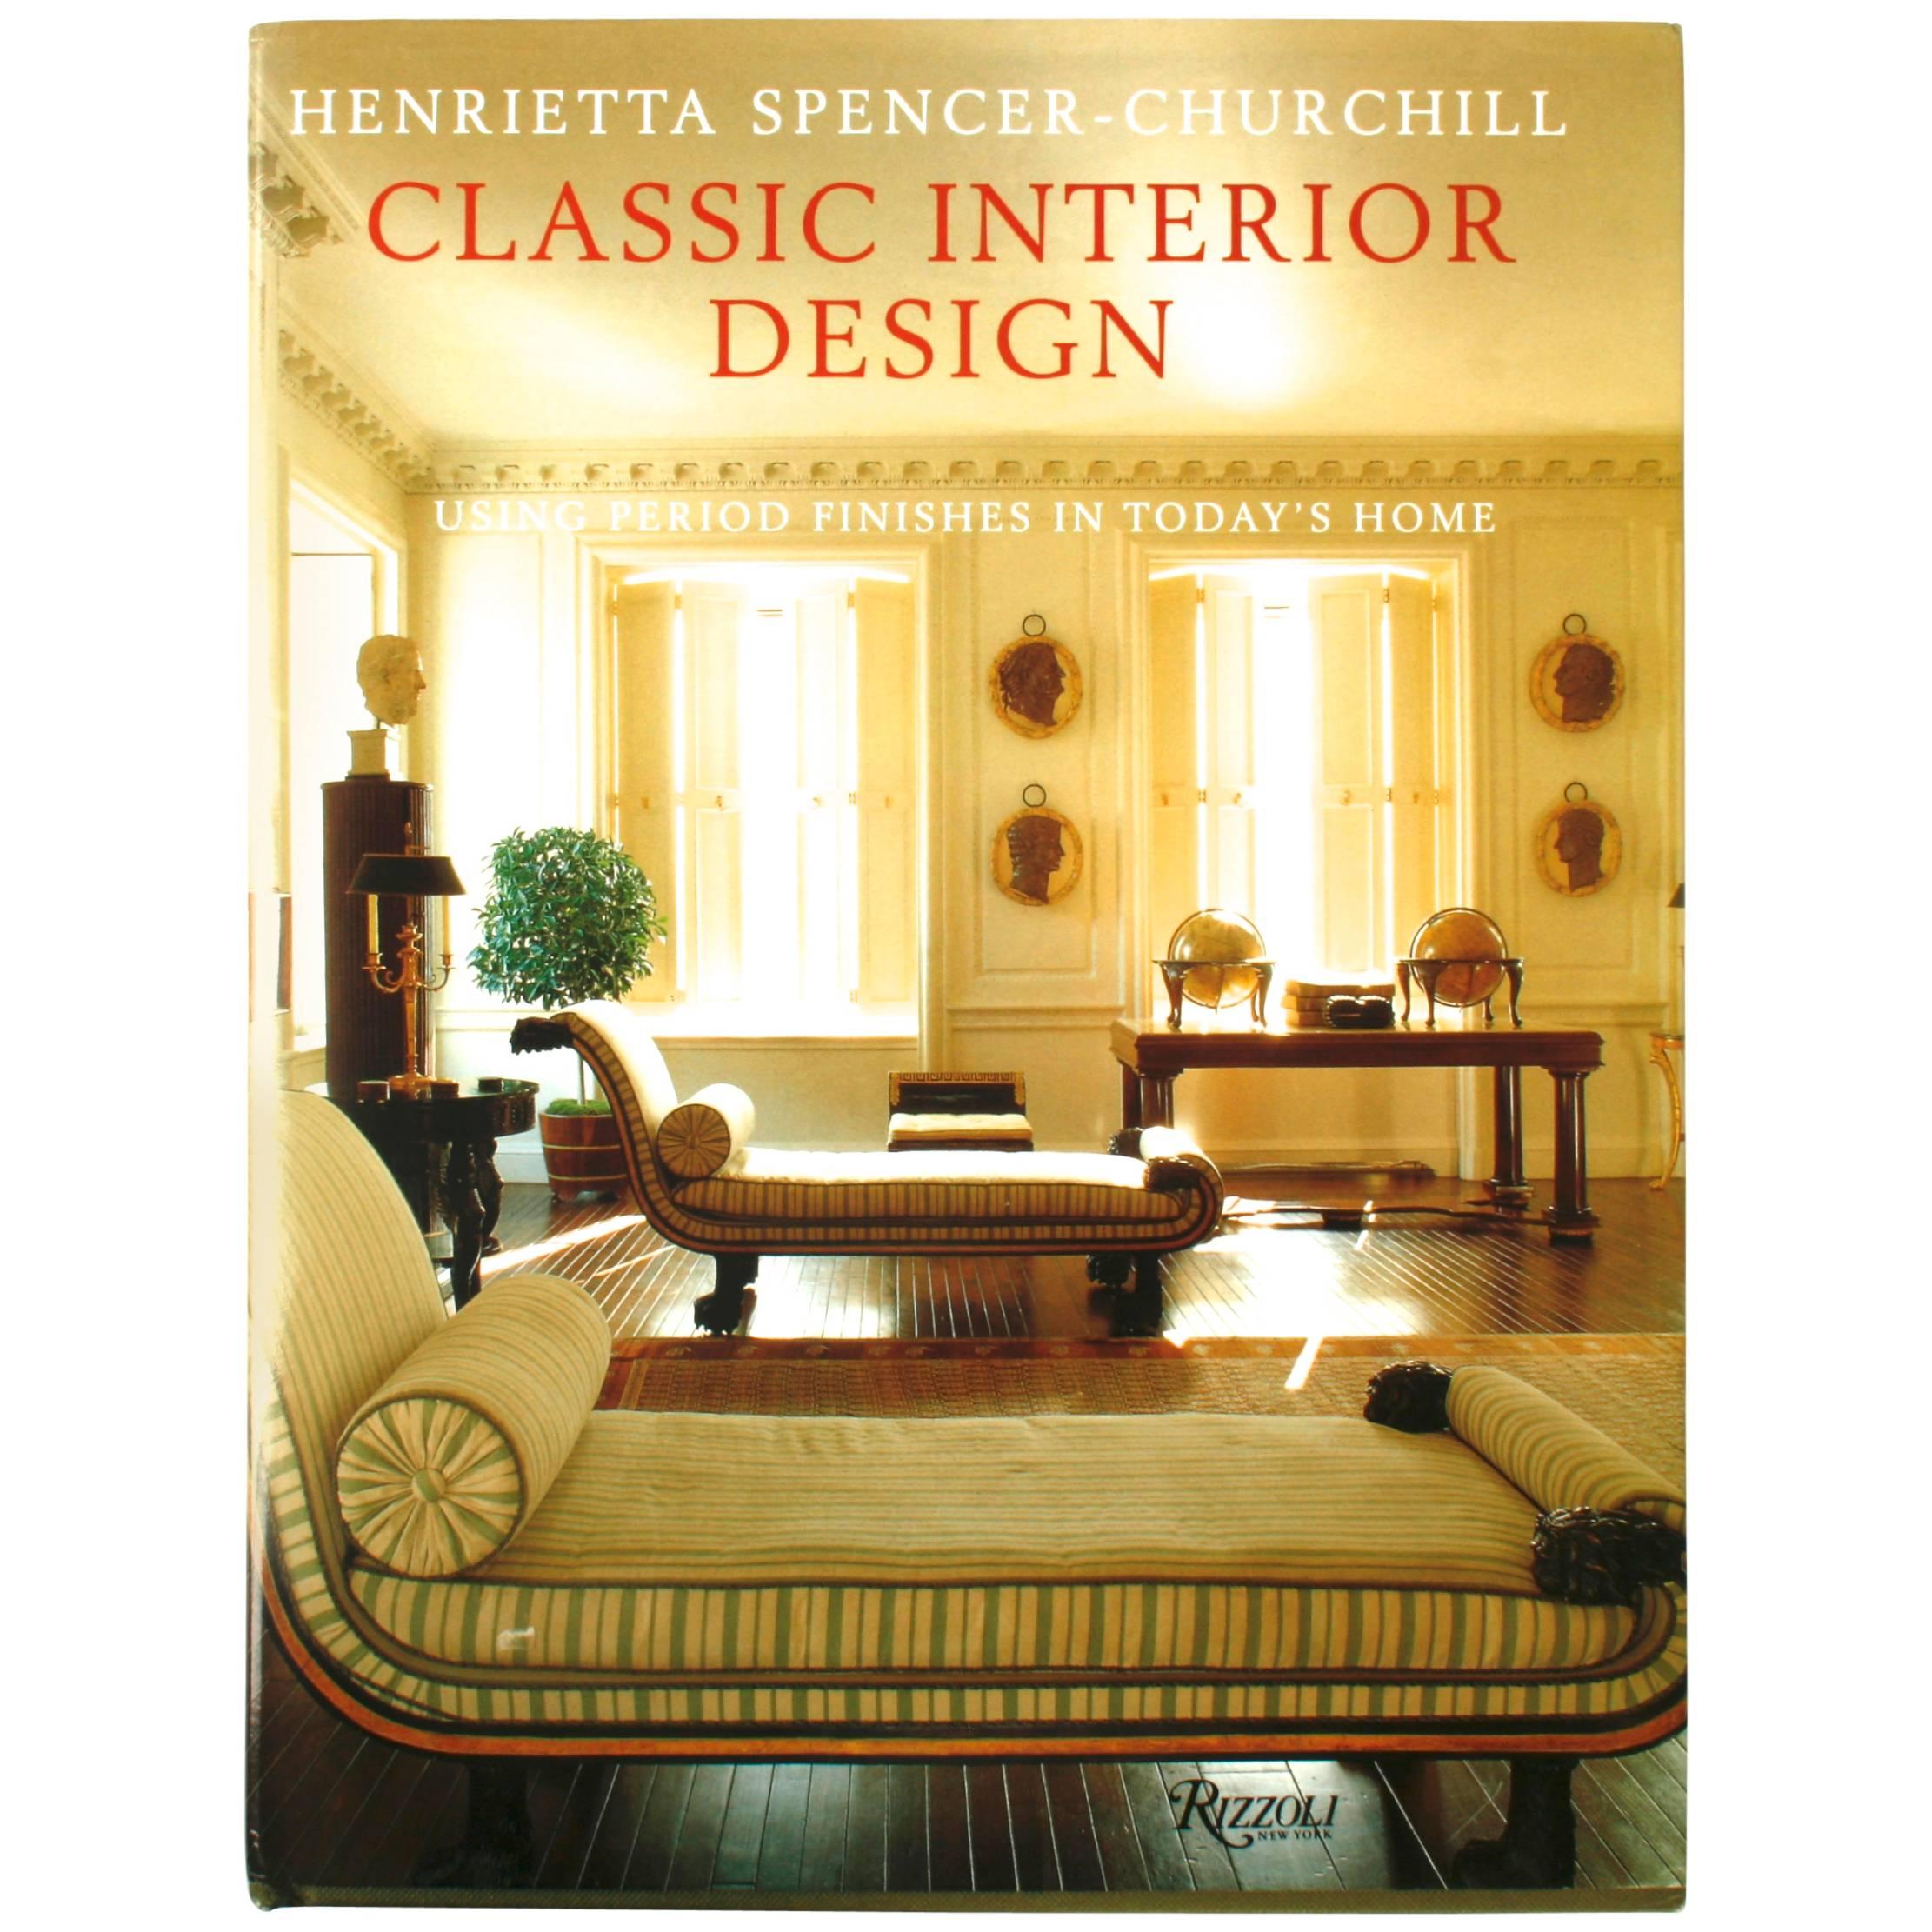 "Classical Interior Design, Using Period Finishes in Today's Home" Book